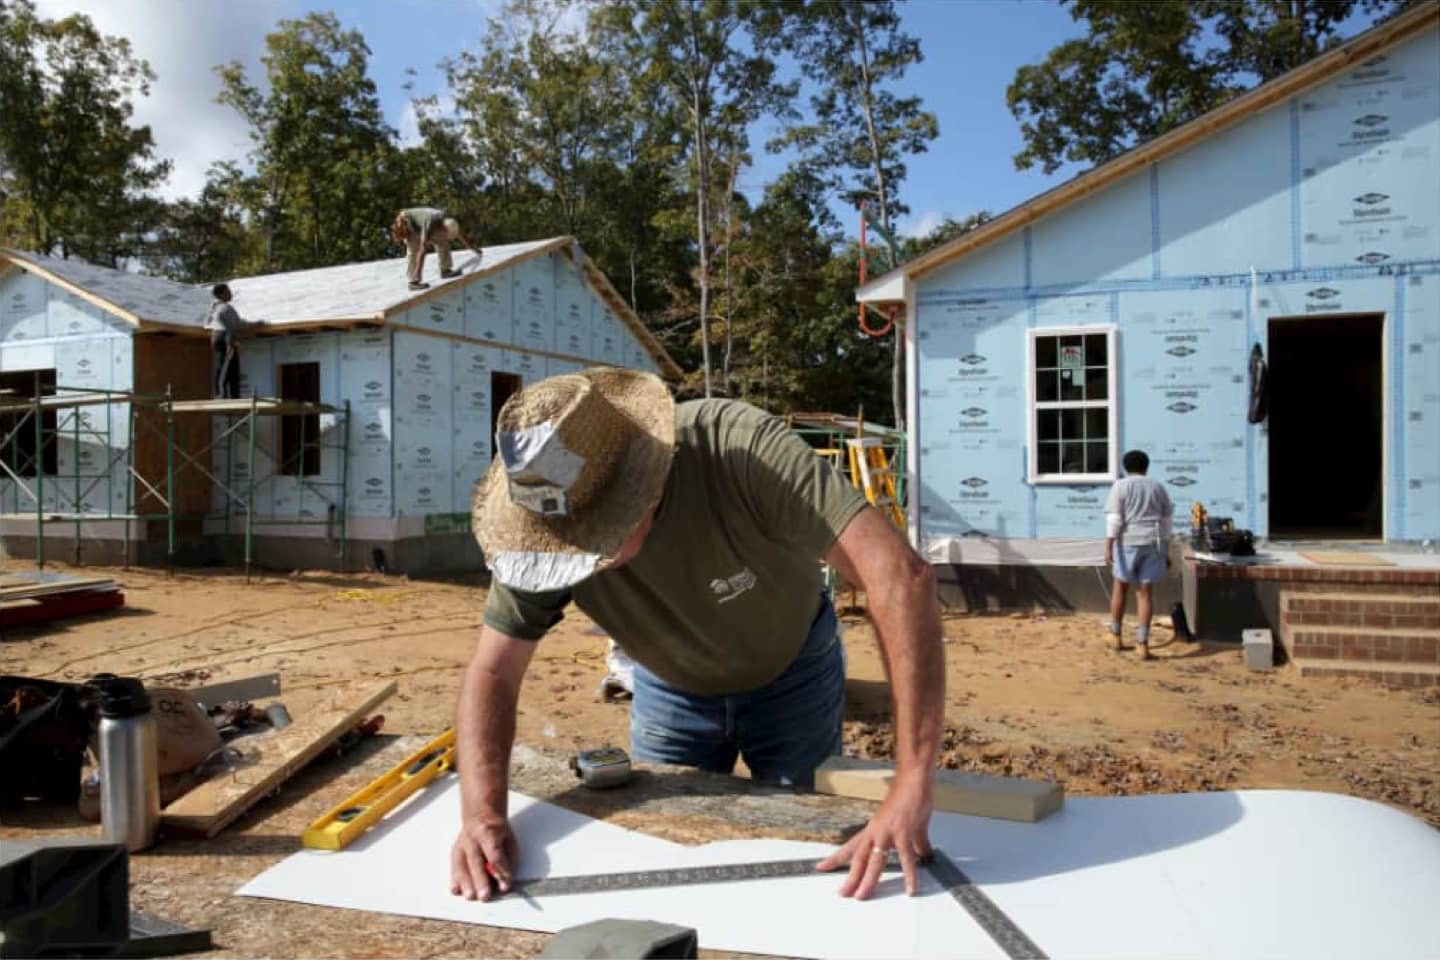 Man working at Habitat home building location